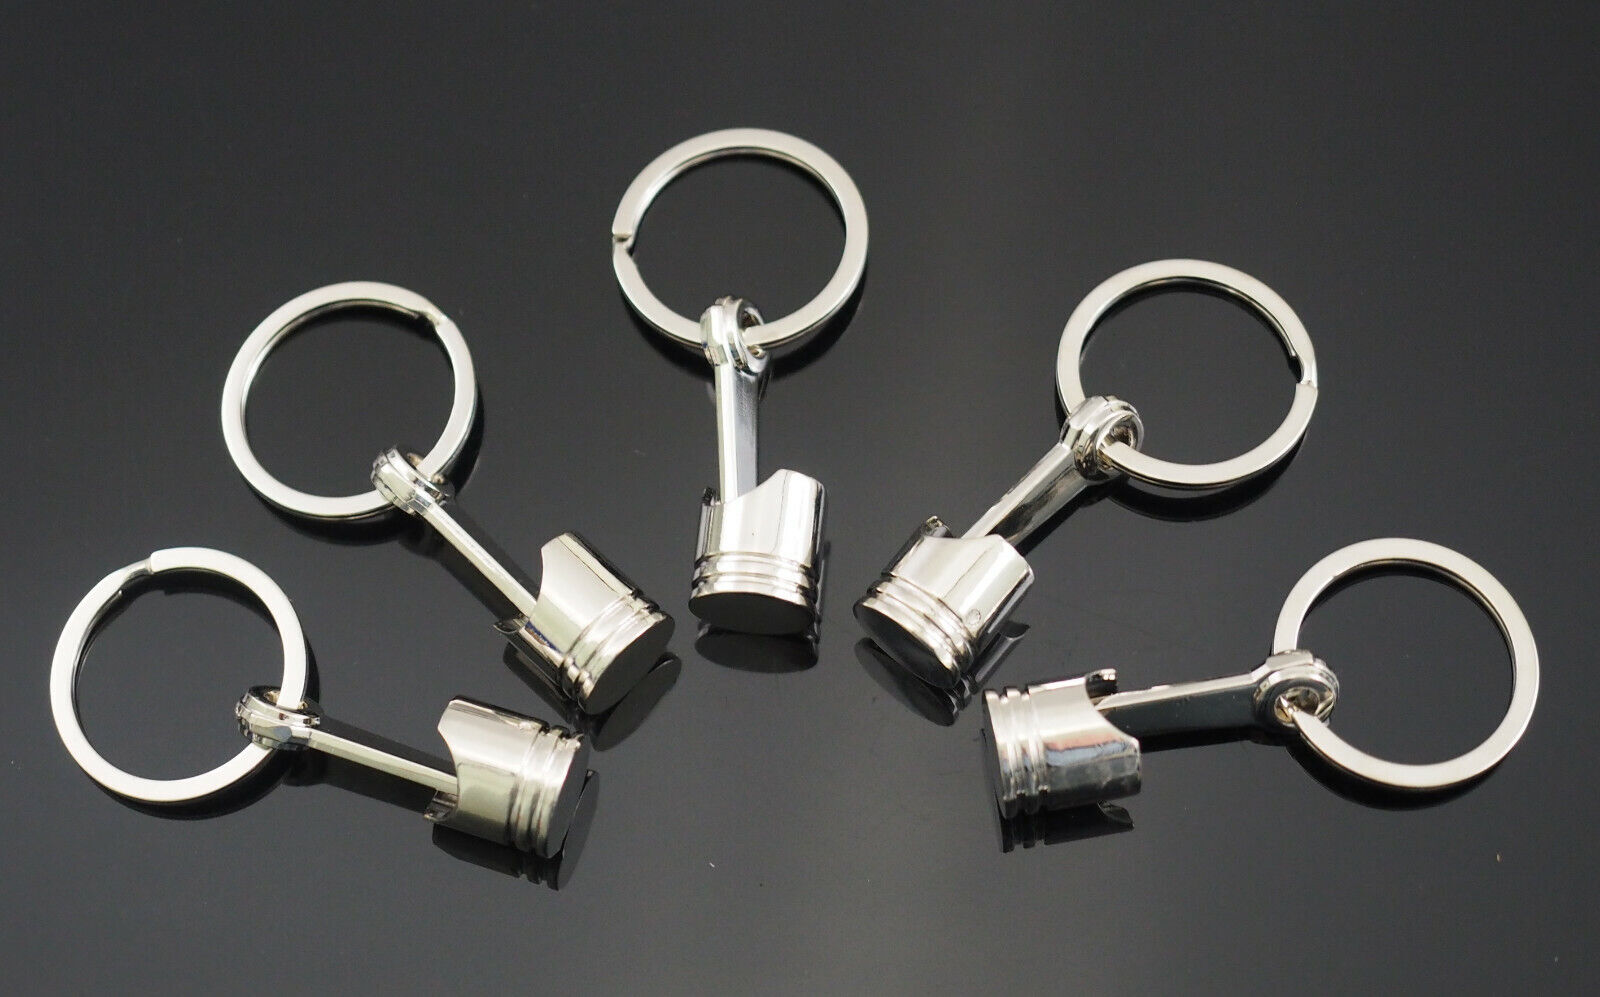 5x PCS Piston Connecting Rod Car Engine Silver Metal 3D Keychain Key Chain Ring